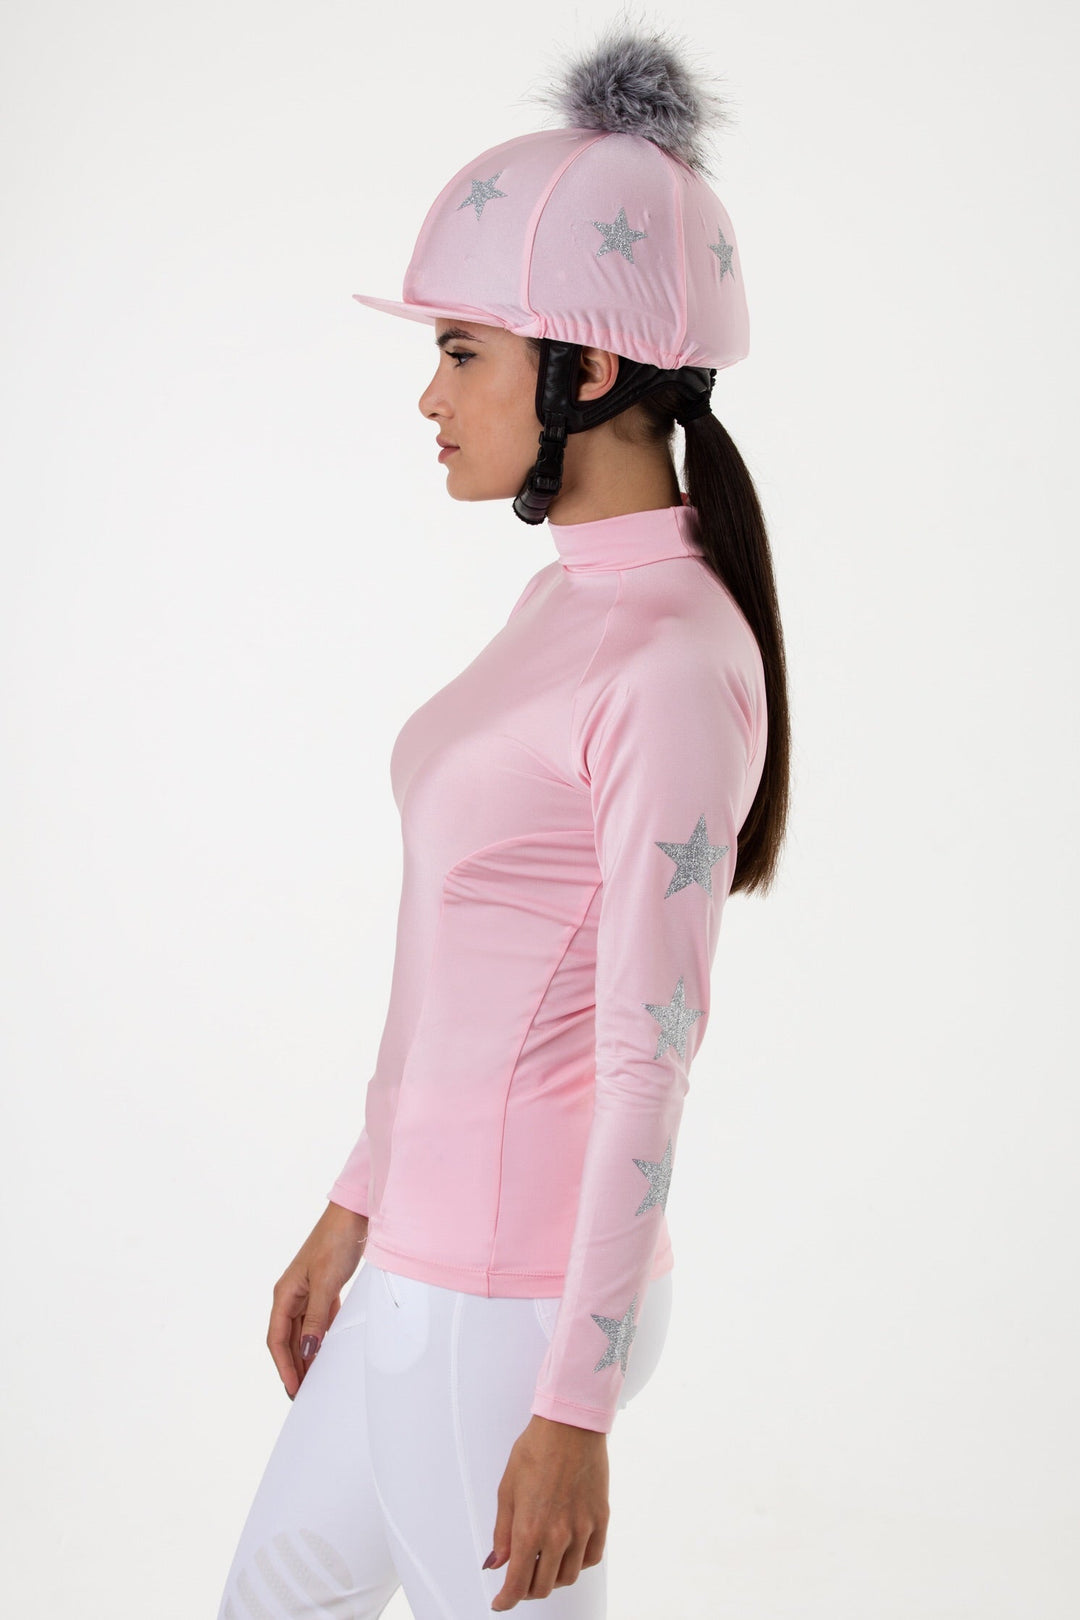 Stockinjur Baby Pink Constellation Riding Baselayer and pom pom riding hat cover 